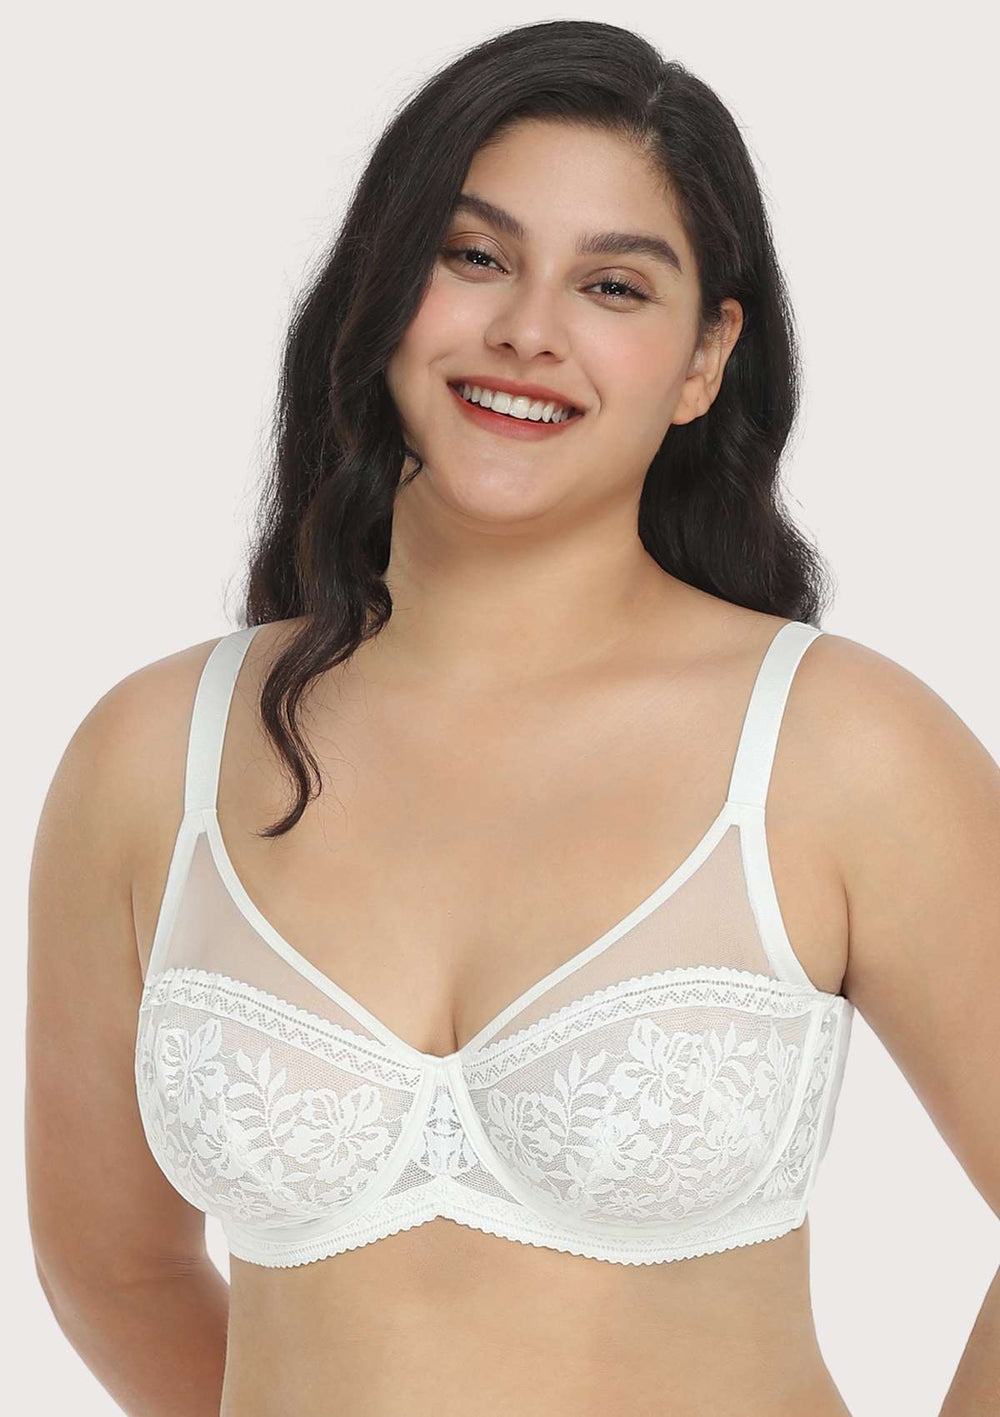 HSIA Gladioli Lace Mesh Minimizing Unlined Underwire Bra for Fuller Busts